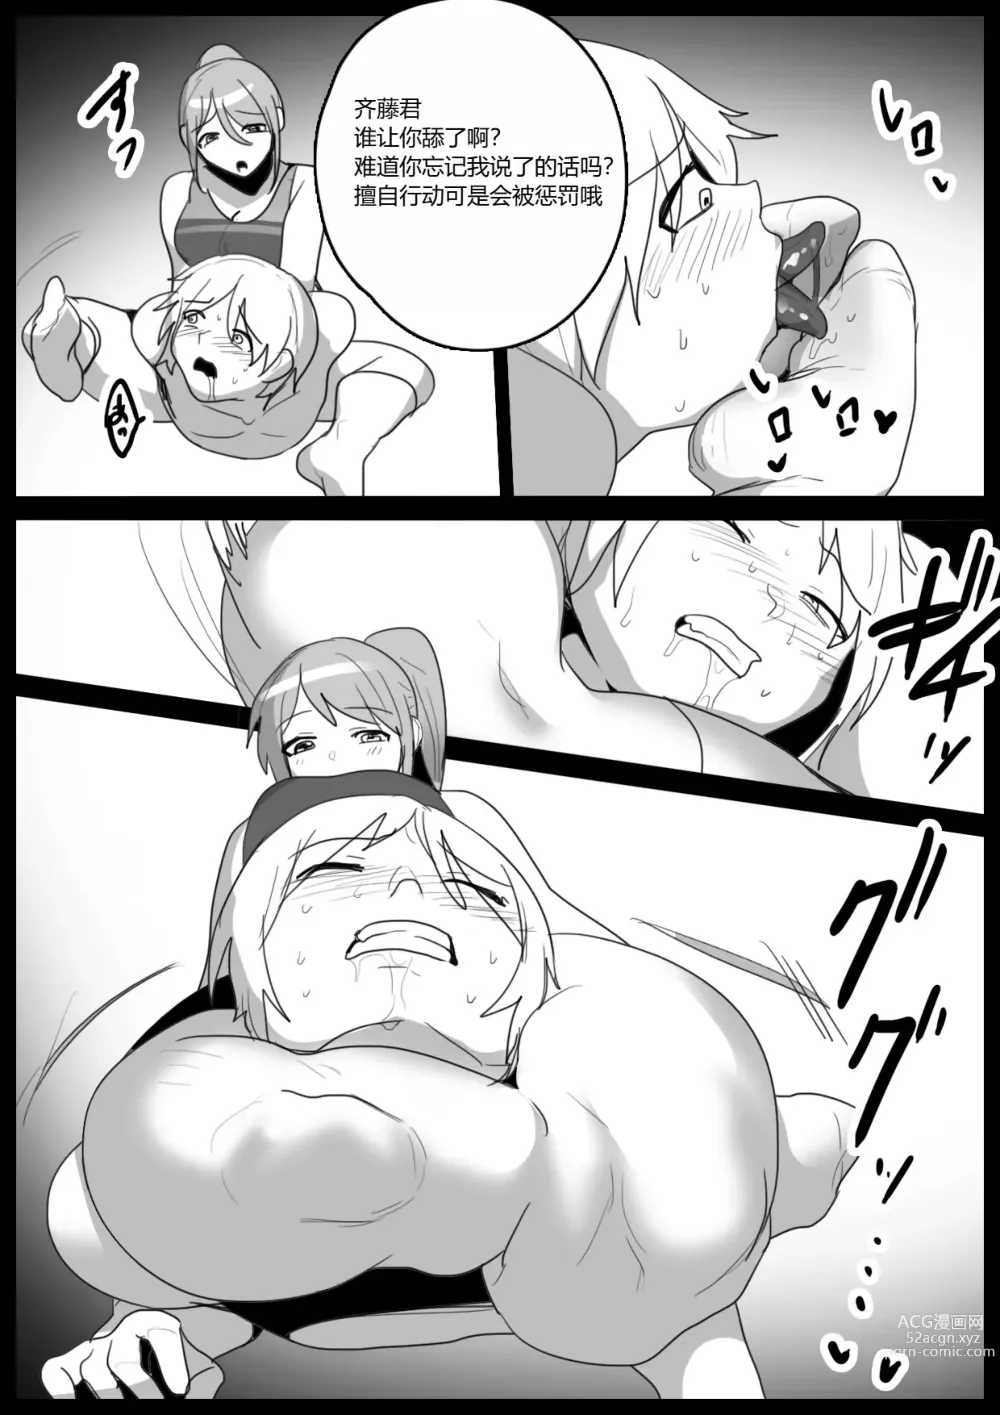 Page 13 of doujinshi Spin-Off of Girls Beat by Rie